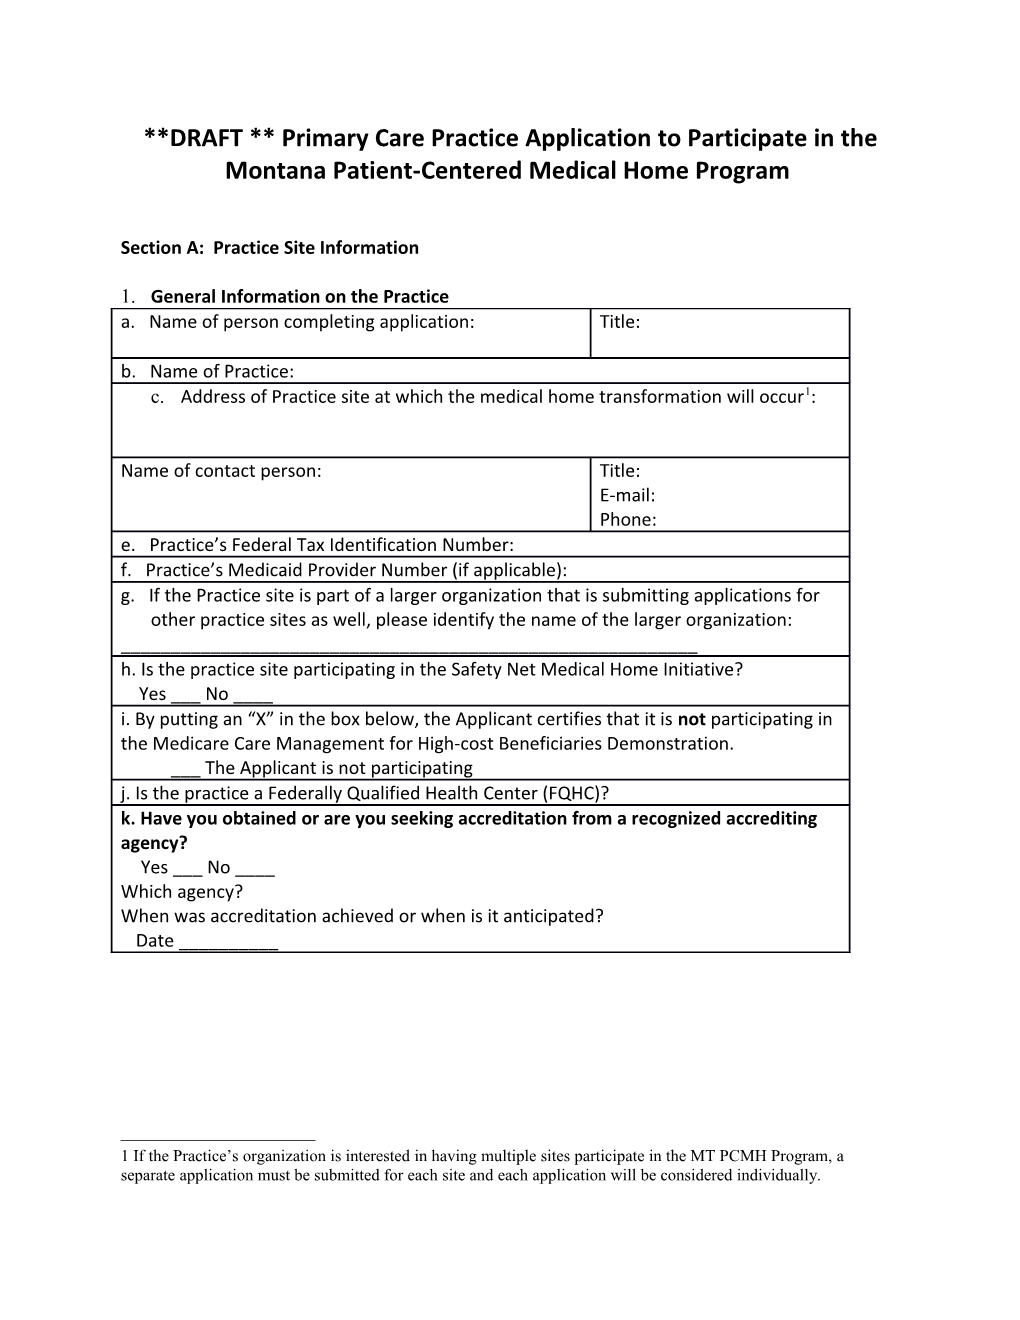 DRAFT Primary Care Practice Application to Participate in The